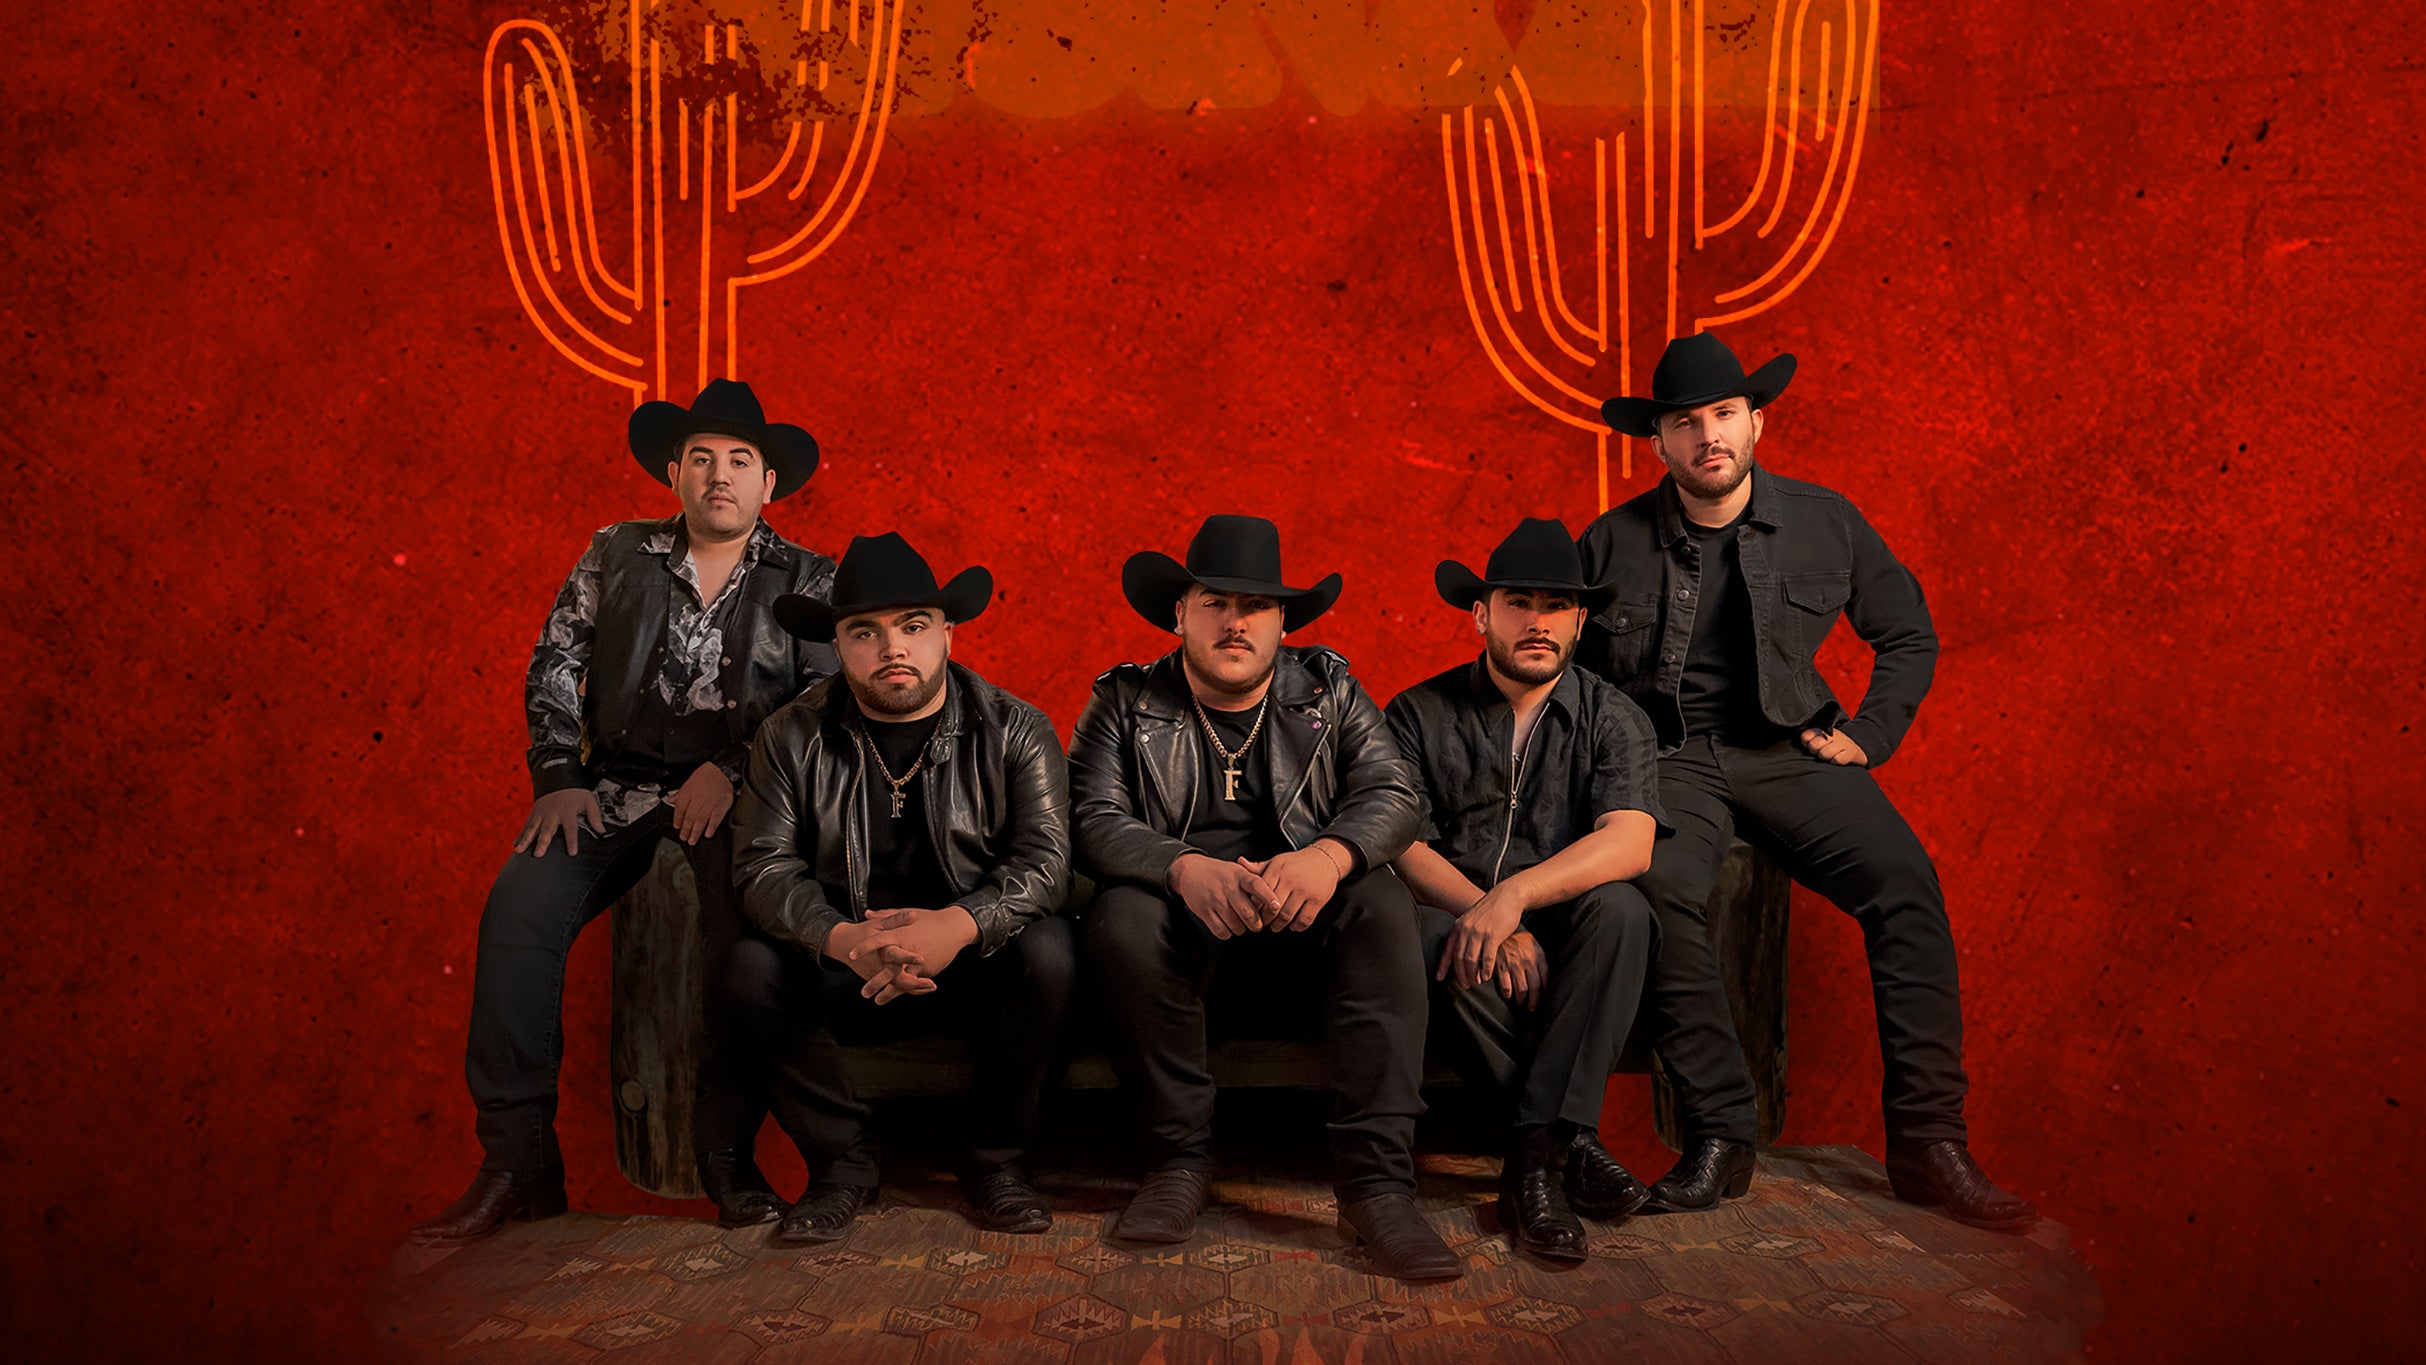 Grupo Frontera with Special Guest Milla 22 free presale info for show tickets in Anaheim, CA (Honda Center)